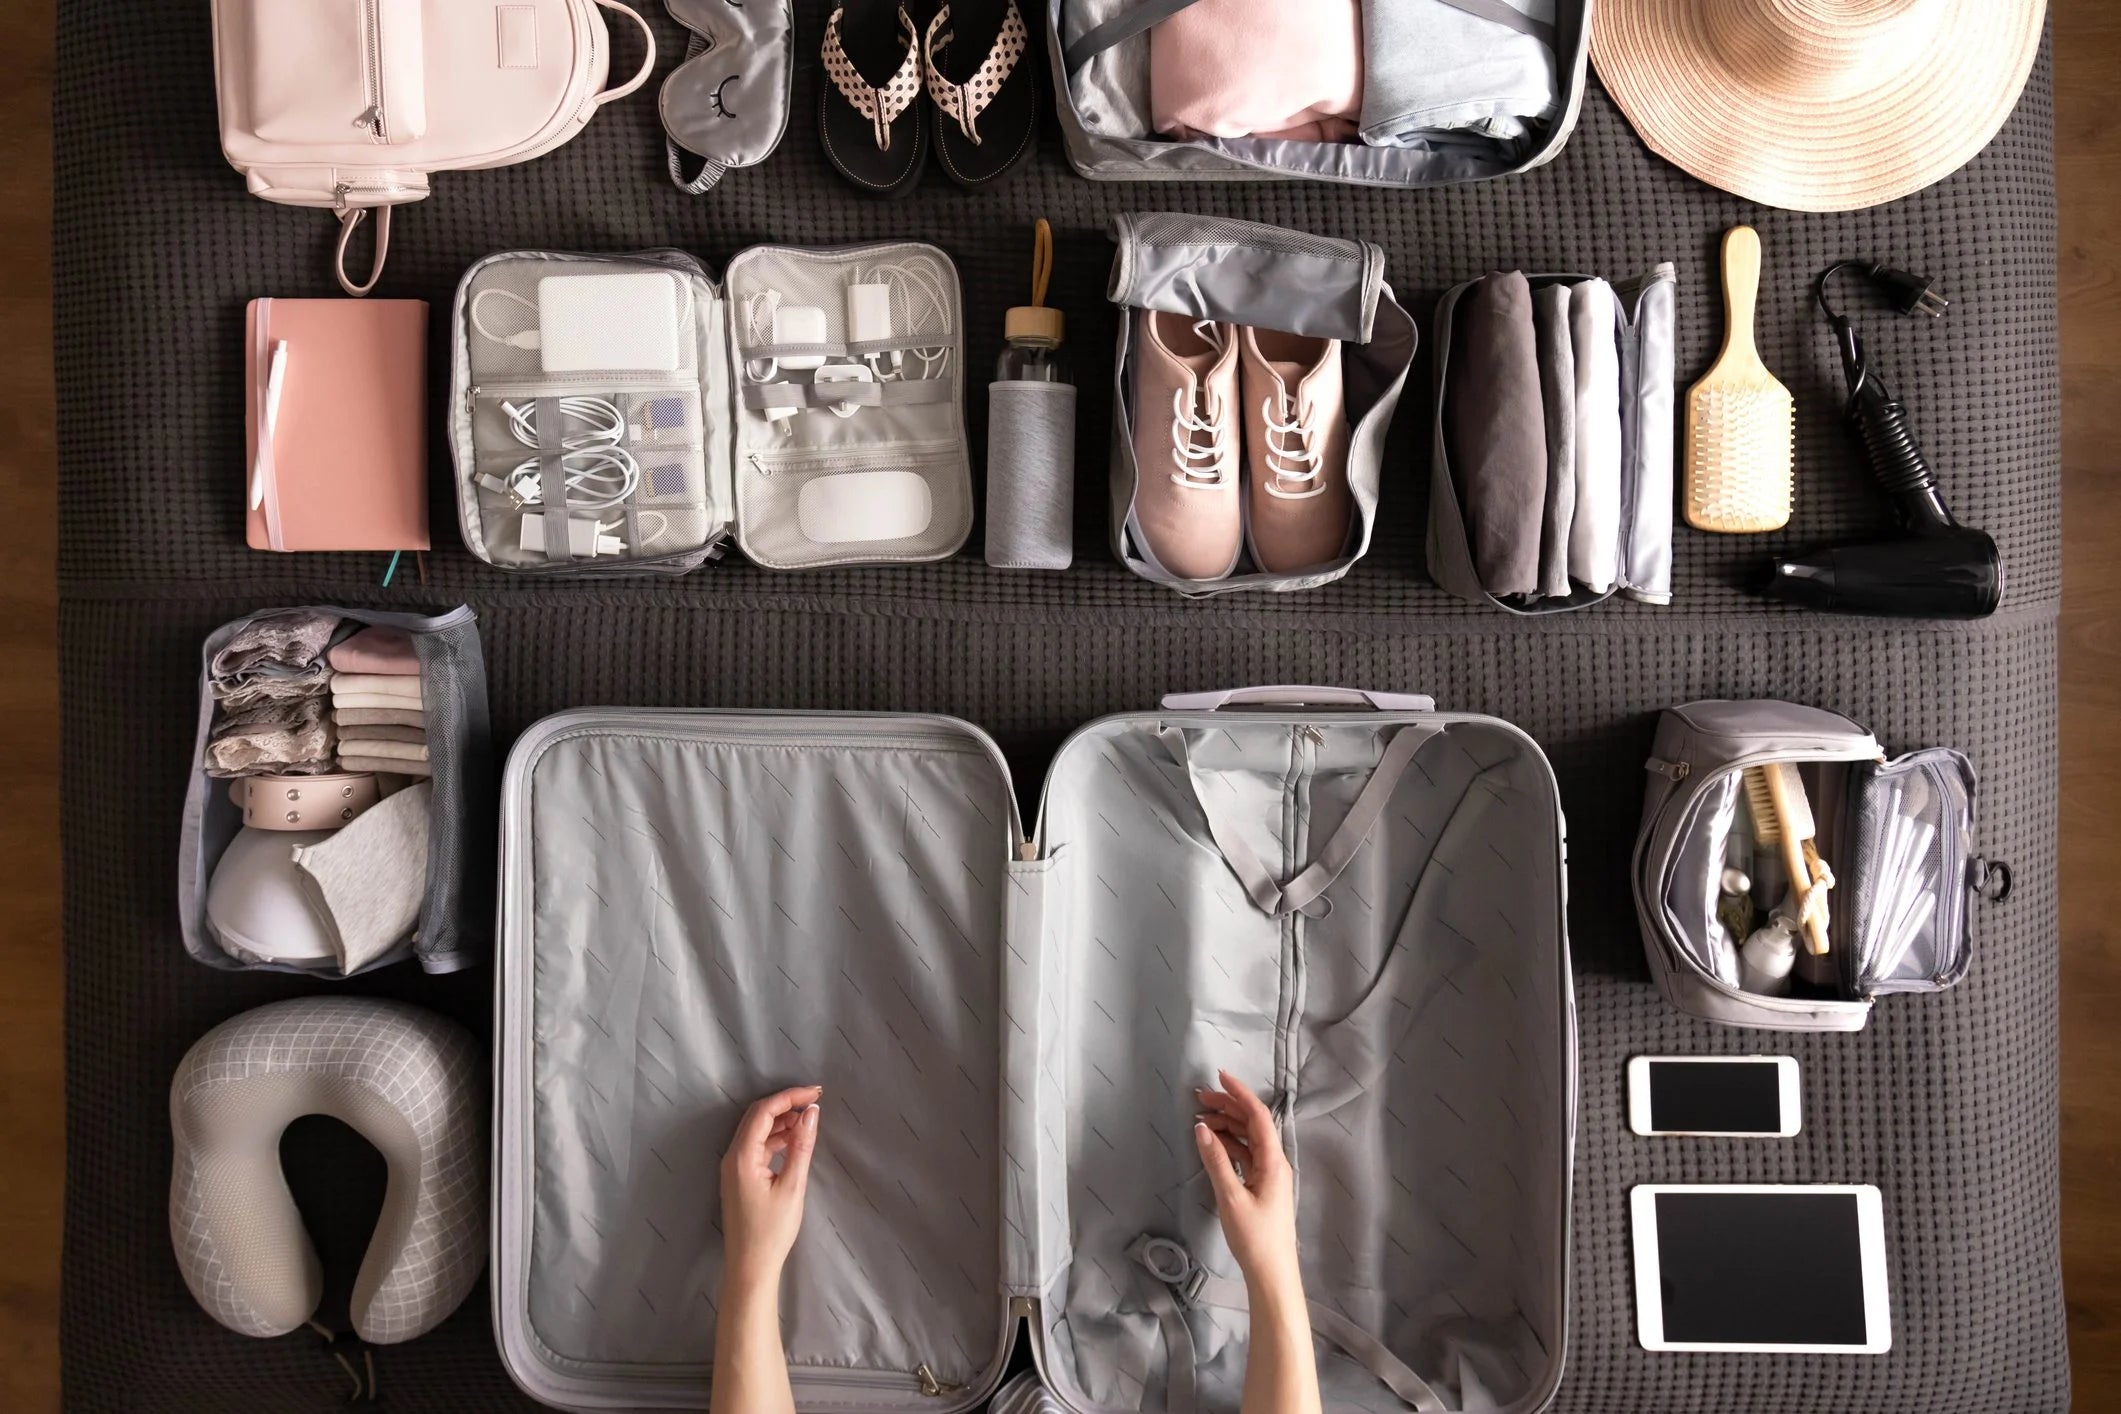 packing-cubes-inside-suitcase-mens-clothes